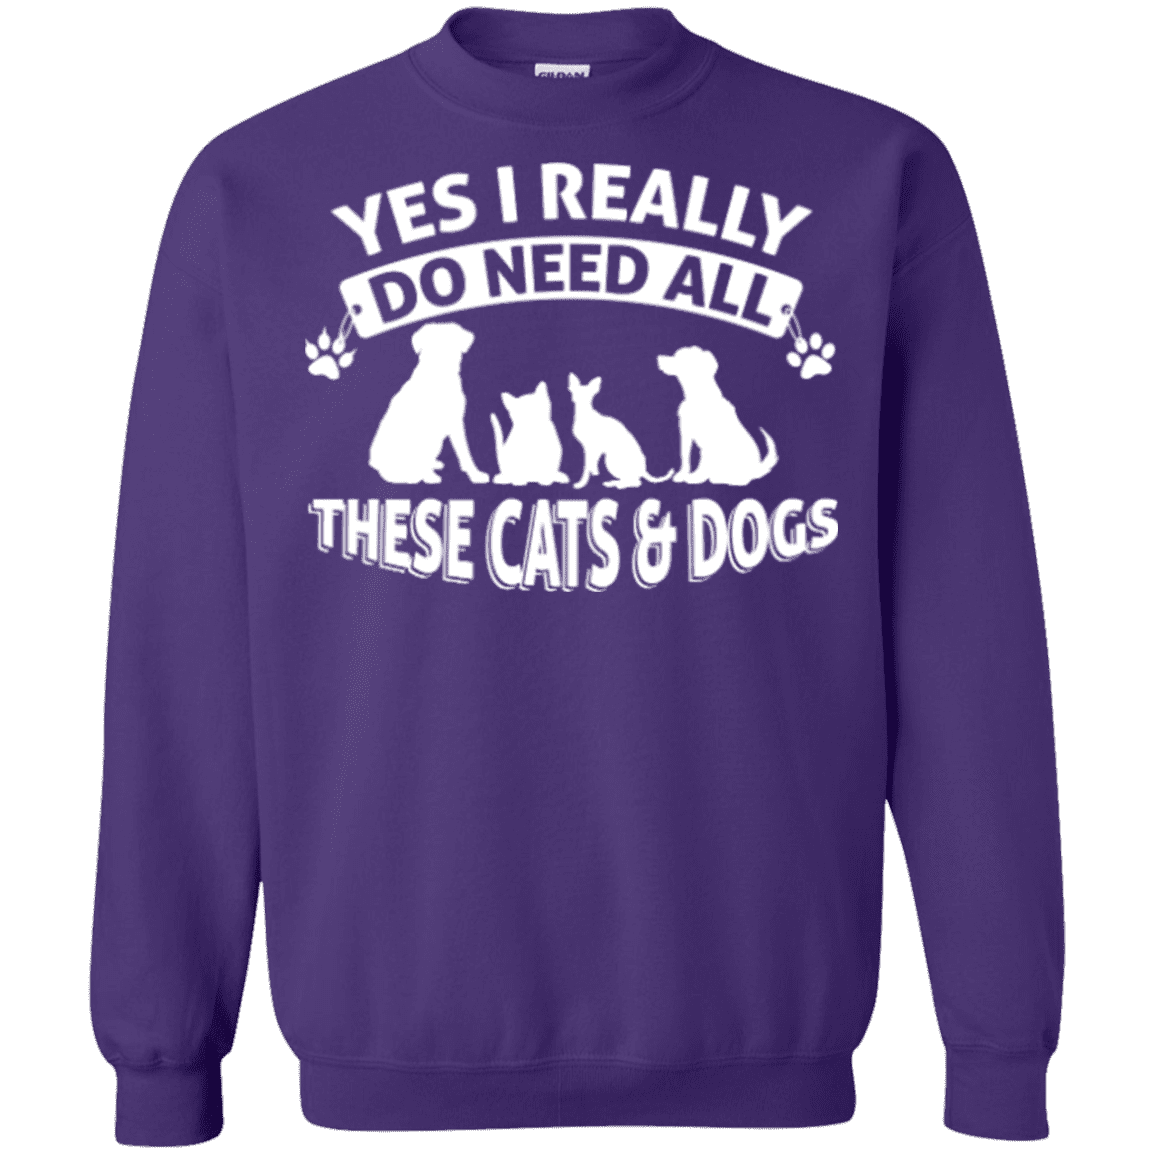 Yes I Need All These Cats and Dogs - Sweatshirt.